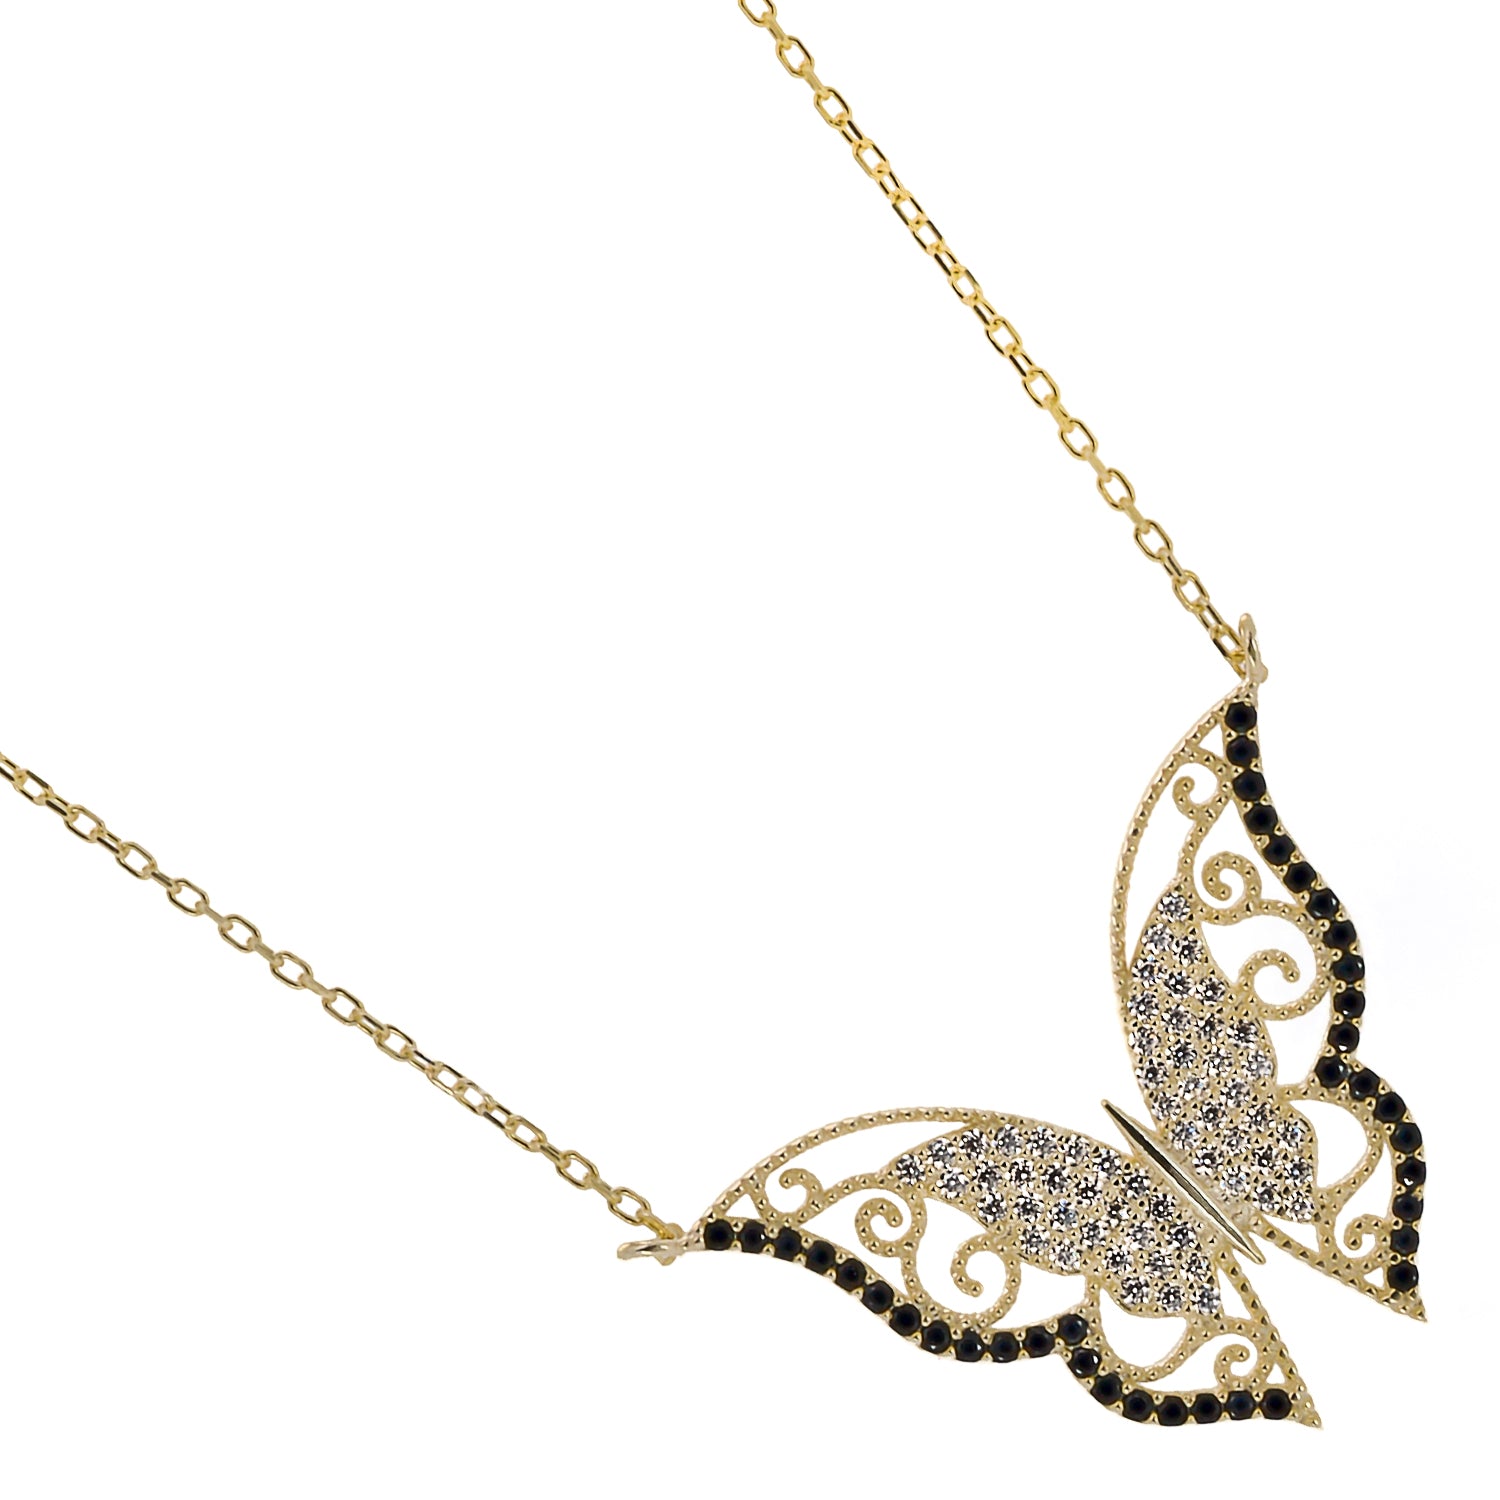 Gold Sparkly Joyful Butterfly Necklace, a captivating piece of jewelry that represents the power of joy and self-discovery.